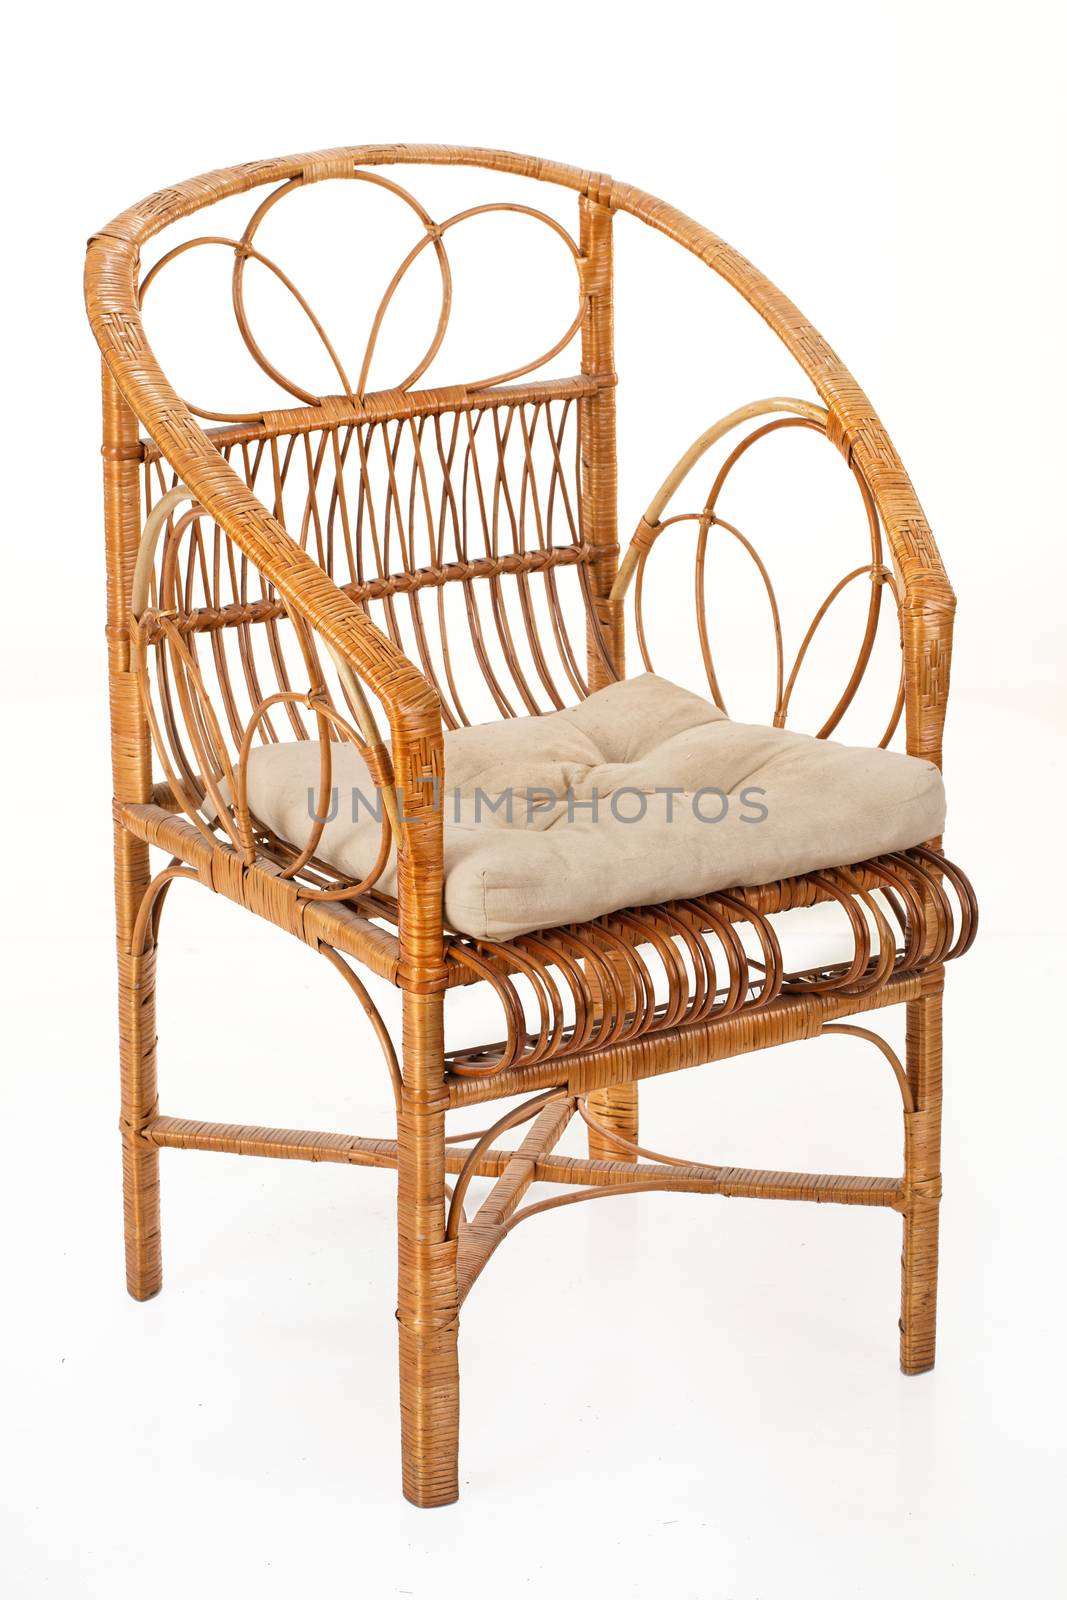 Wicker armchair with a pillow on an isolated studio background